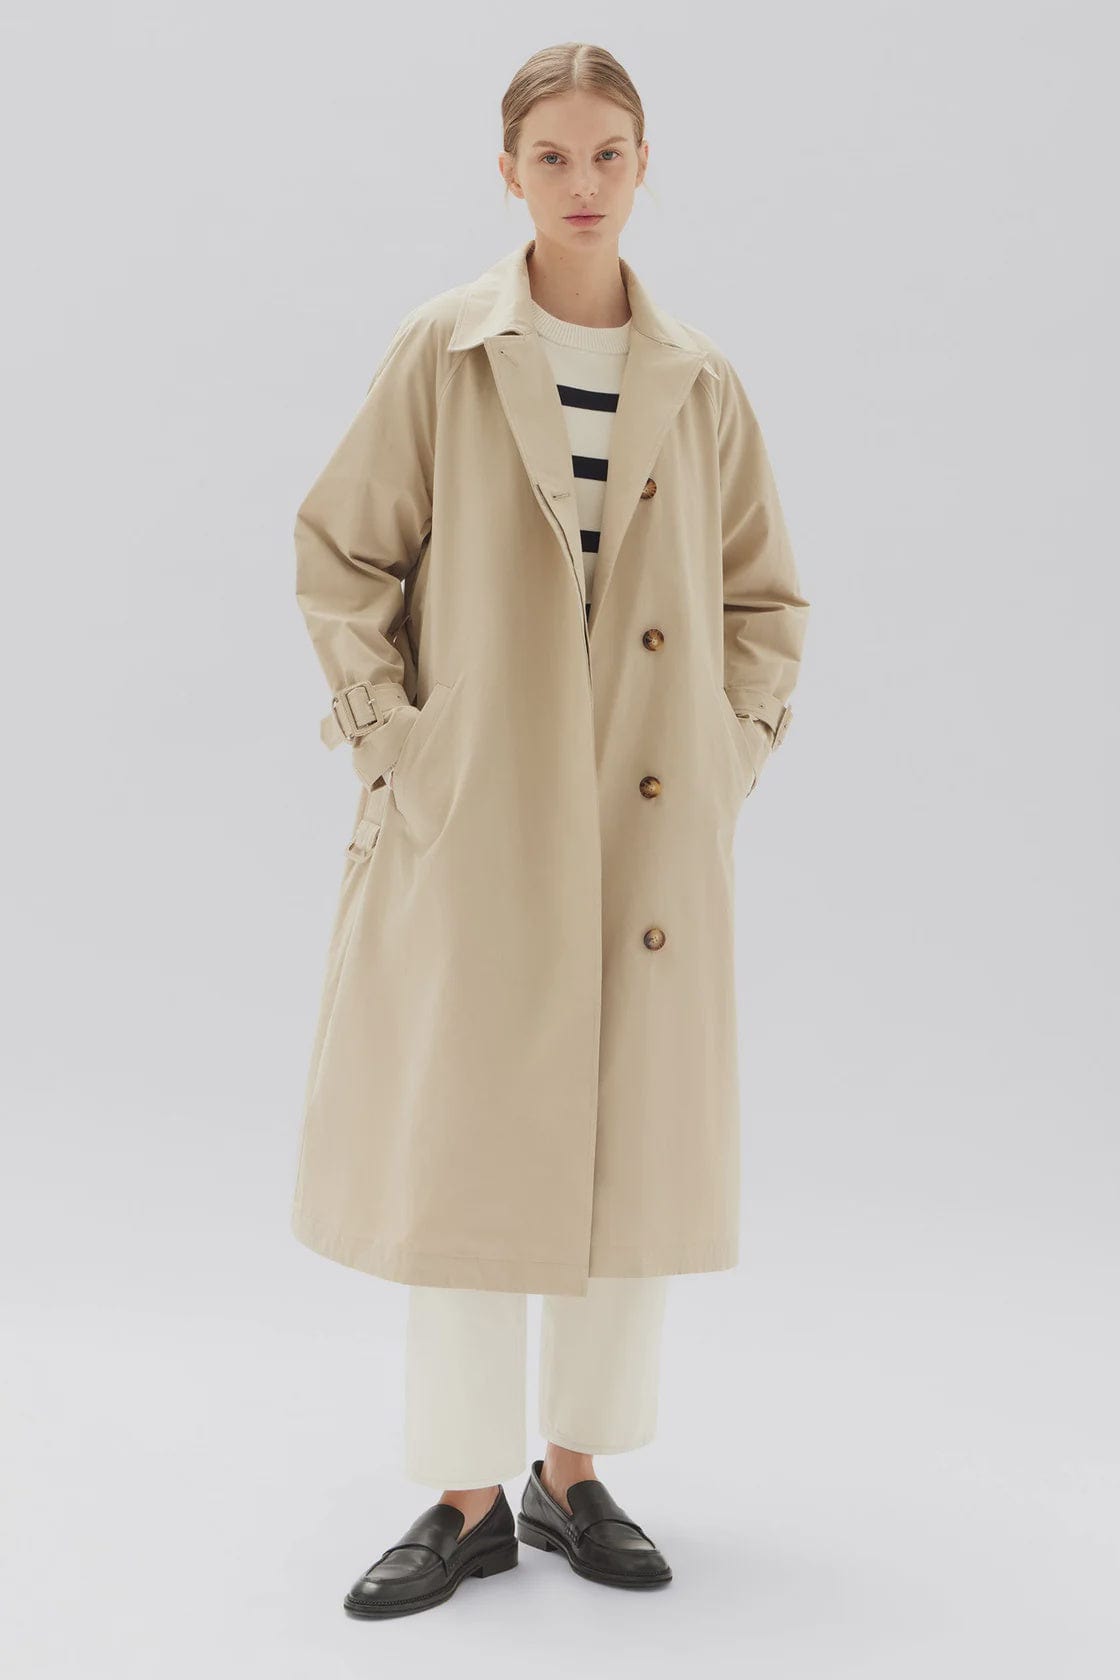 Assembly Label Coats - Trench Assembly Label | Alessandra Trench Coat - Tan